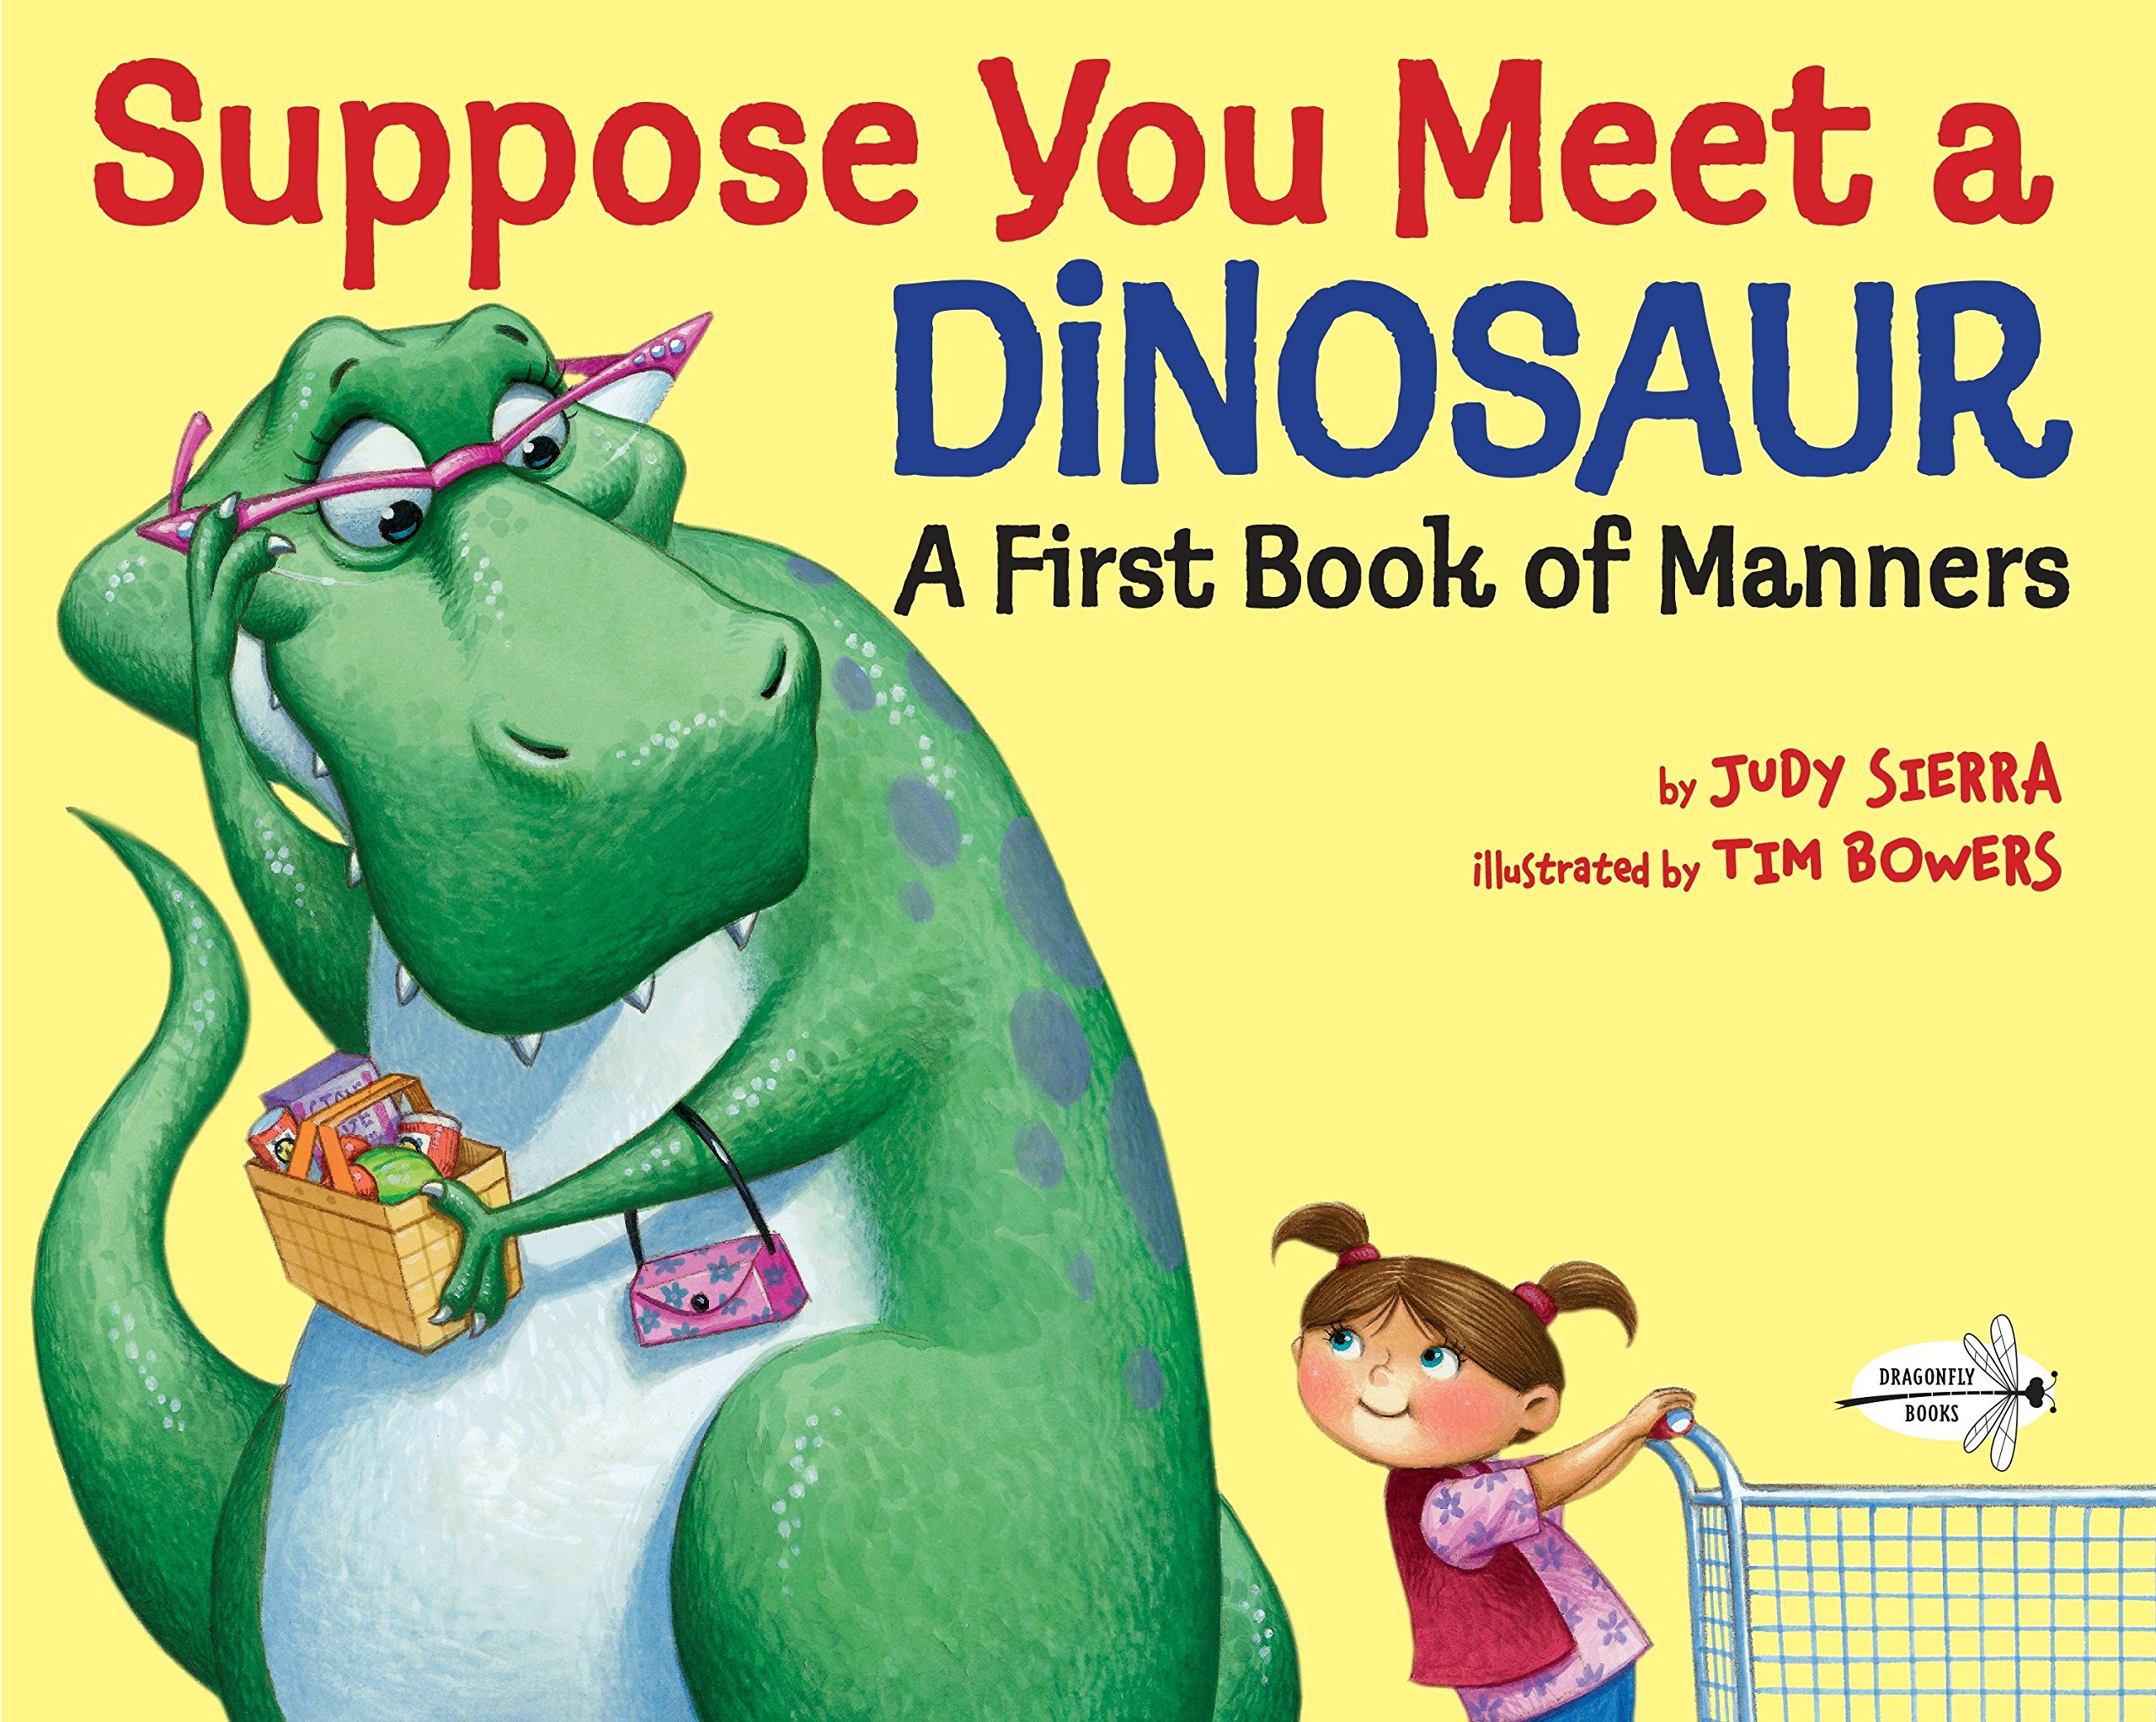 Suppose You Meet a Dinosaur: A First book of Manners